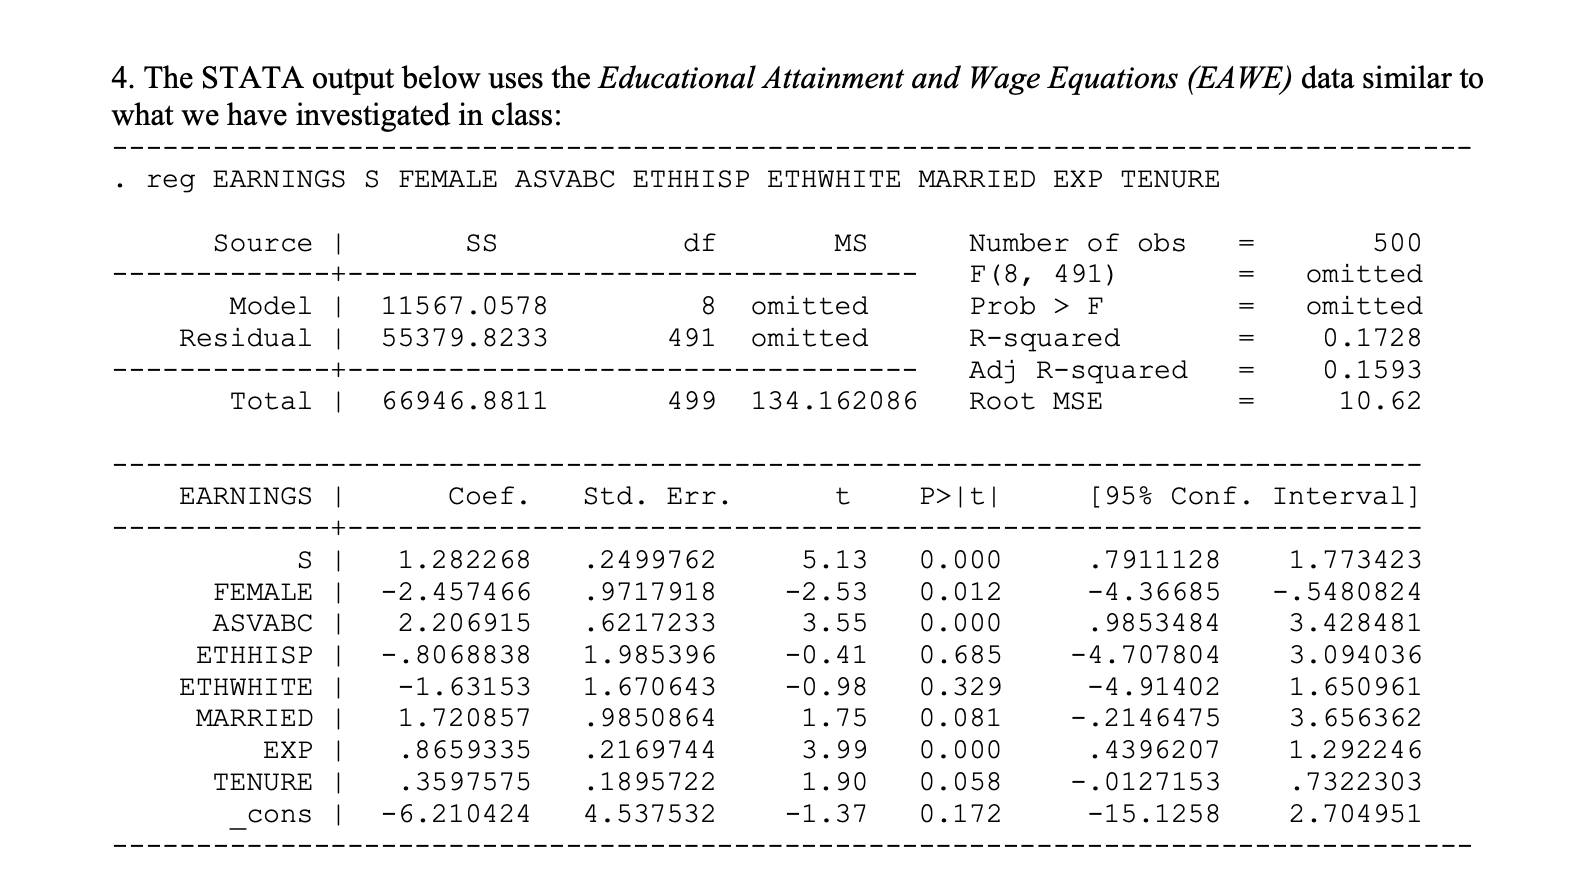 4. The STATA output below uses the Educational Attainment and Wage Equations (EAWE) data similar to
what we have investigated in class:
reg EARNINGS S FEMALE ASVABC ETHHISP ETHWHITE MARRIED EXP TENURE
500
Source |
df
Number of obs
SS
MS
omitted
F (8, 491)
Model |
11567.0578
8.
omitted
Prob > F
omitted
omitted
Residual
55379.8233
491
R-squared
Adj R-squared
0.1728
0.1593
Total |
10.62
66946.8811
499
134.162086
Root MSE
P> |t|
EARNINGS |
Std. Err.
[95% Conf. Interval]
Coef.
5.13
1.282268
.2499762
0.000
.7911128
1.773423
0.012
-.5480824
3.428481
FEMALE |
ASVABC |
-2.457466
.9717918
-2.53
-4.36685
2.206915
.6217233
3.55
0.000
.9853484
1.985396
0.685
3.094036
ETHHISP
-.8068838
-0.41
-4.707804
ETHWHITE |
MARRIED |
1.670643
-0.98
0.329
-1.63153
-4.91402
1.650961
1.720857
.9850864
1.75
0.081
-.2146475
3.656362
. 4396207
EXP |
3.99
.8659335
.2169744
0.000
1.292246
.3597575
.1895722
1.90
0.058
-.0127153
.7322303
TENURE
-6.210424
2.704951
4.537532
-1.37
0.172
-15.1258
cons
